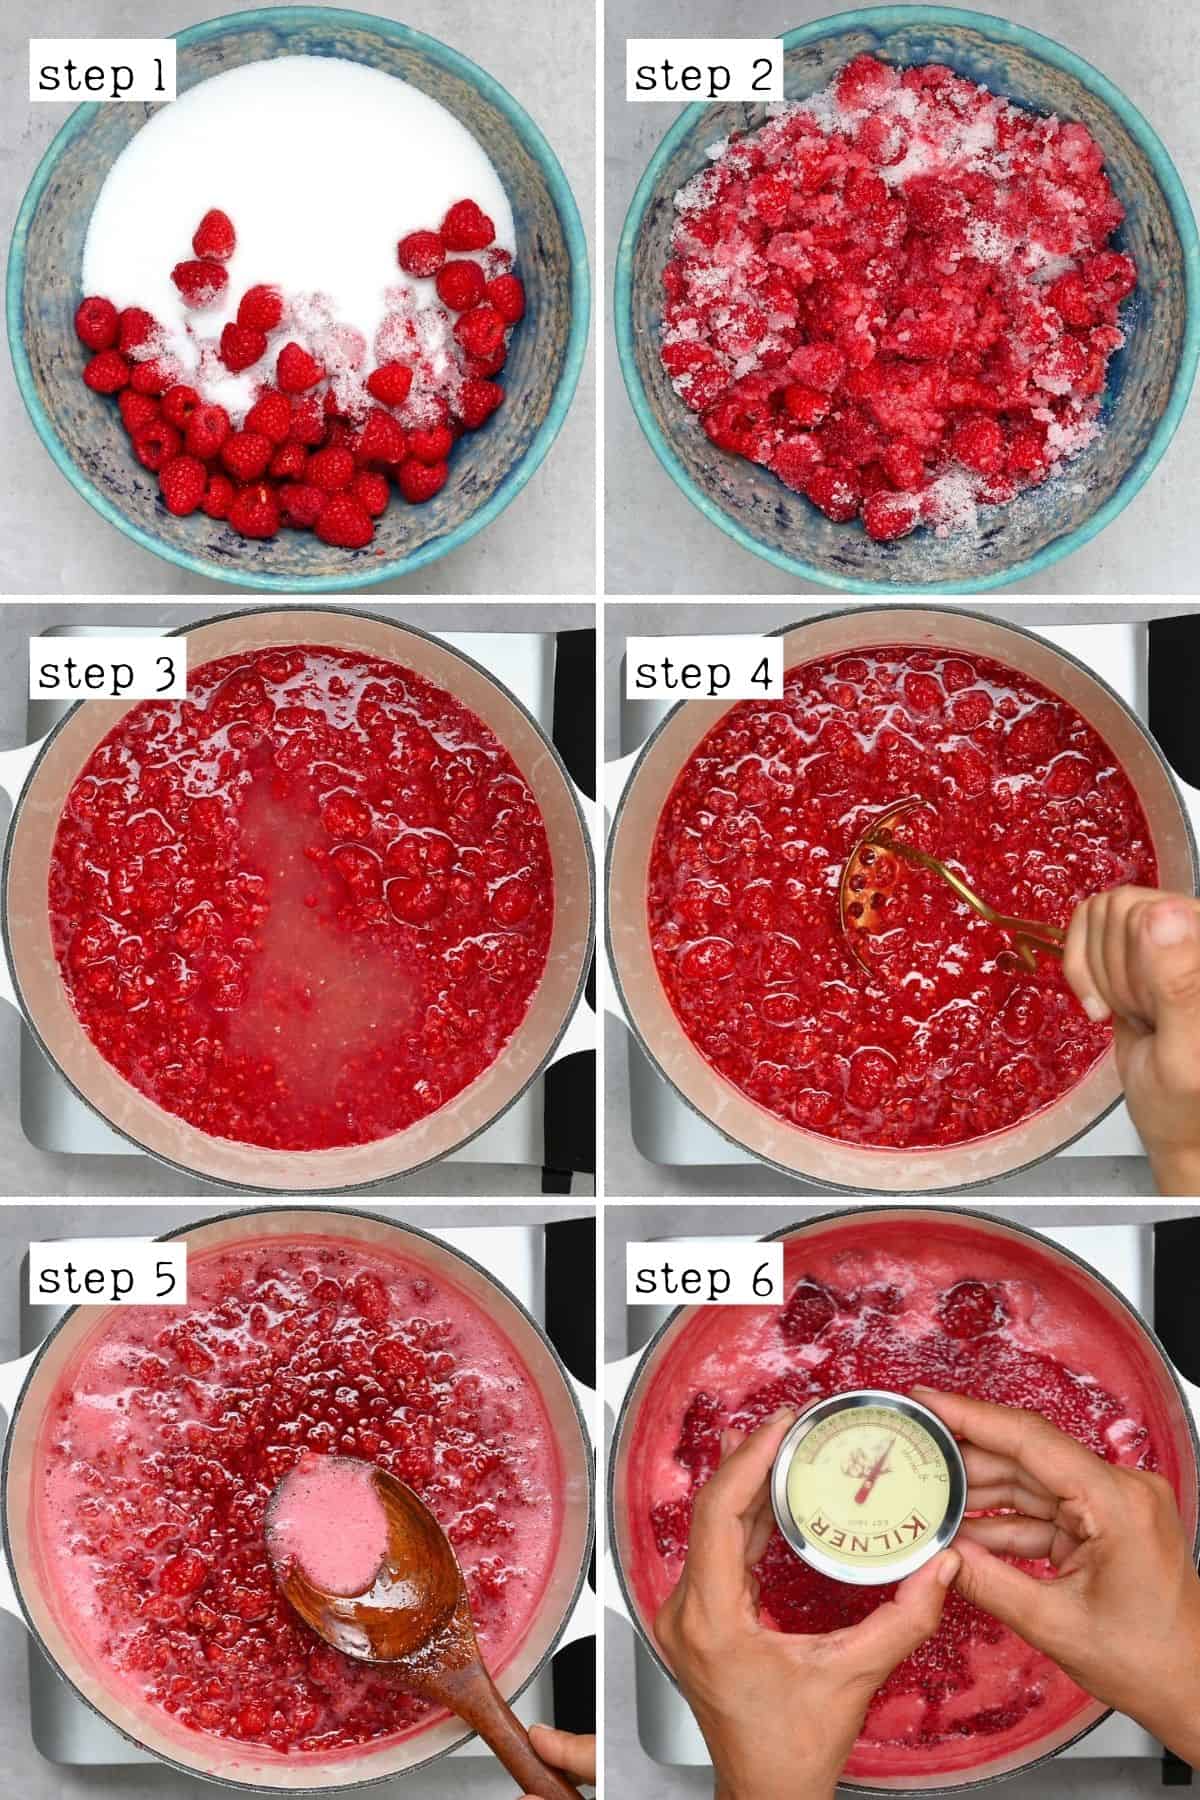 Steps for cooking raspberry jam